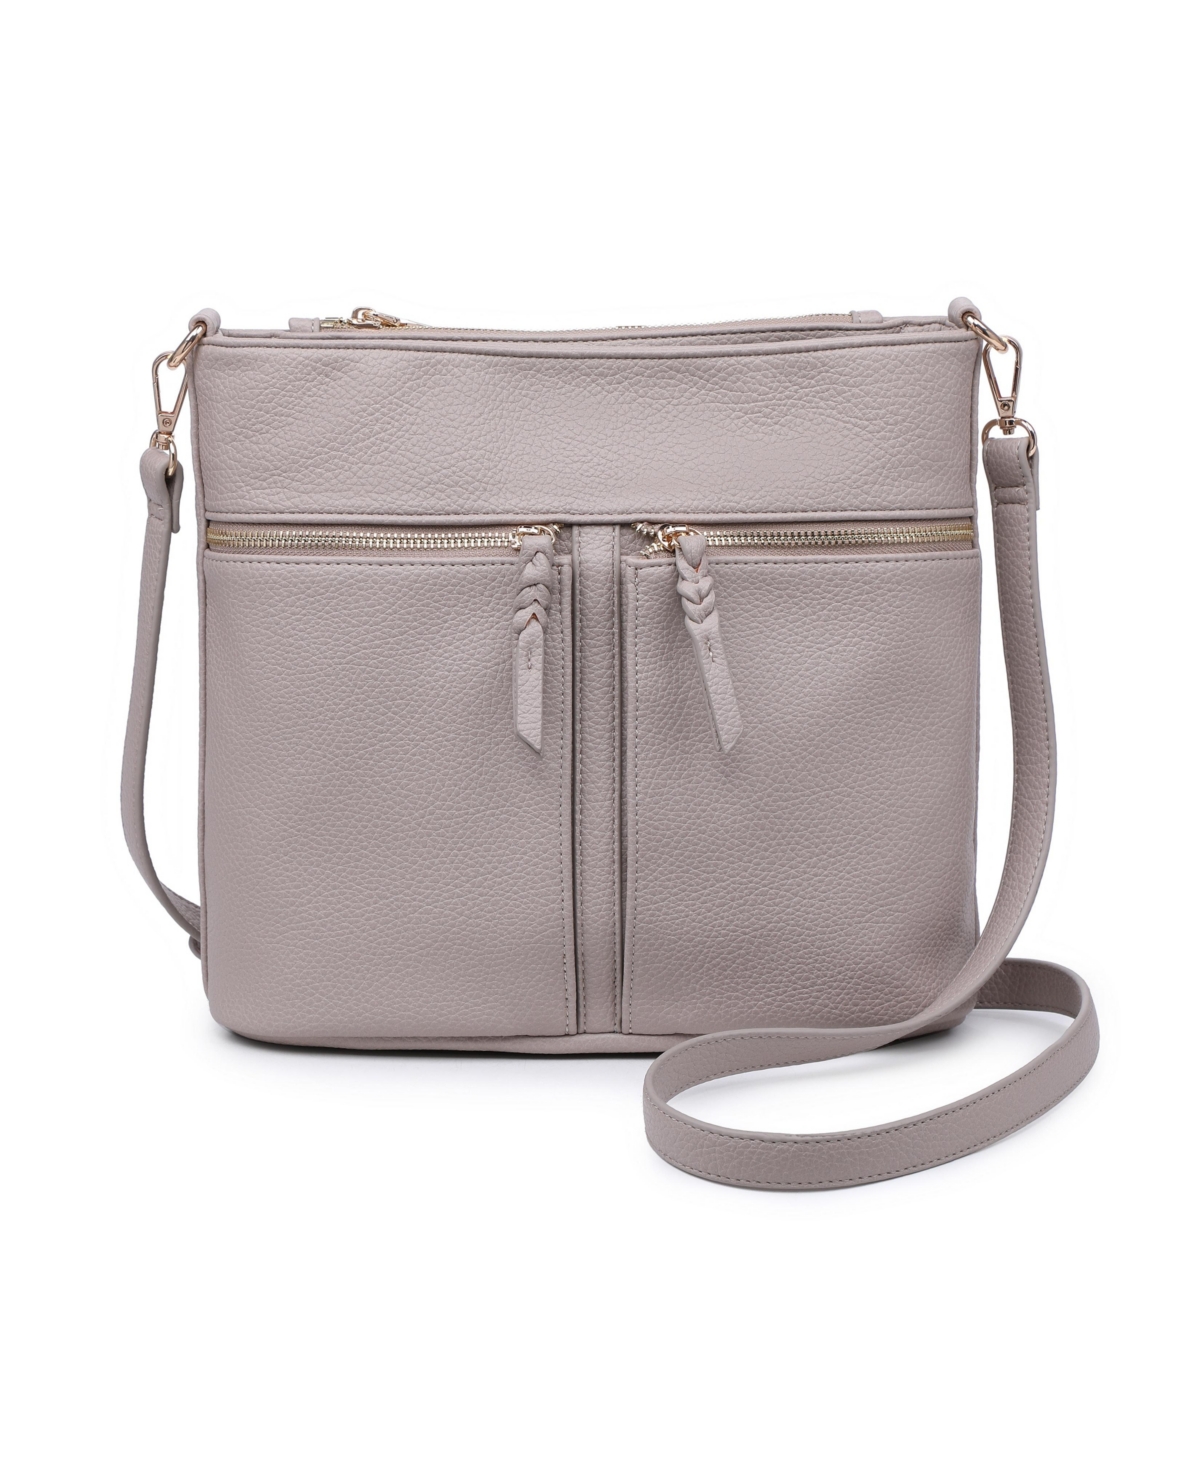 Moda Luxe Lulee Small Crossbody Bag In Natural